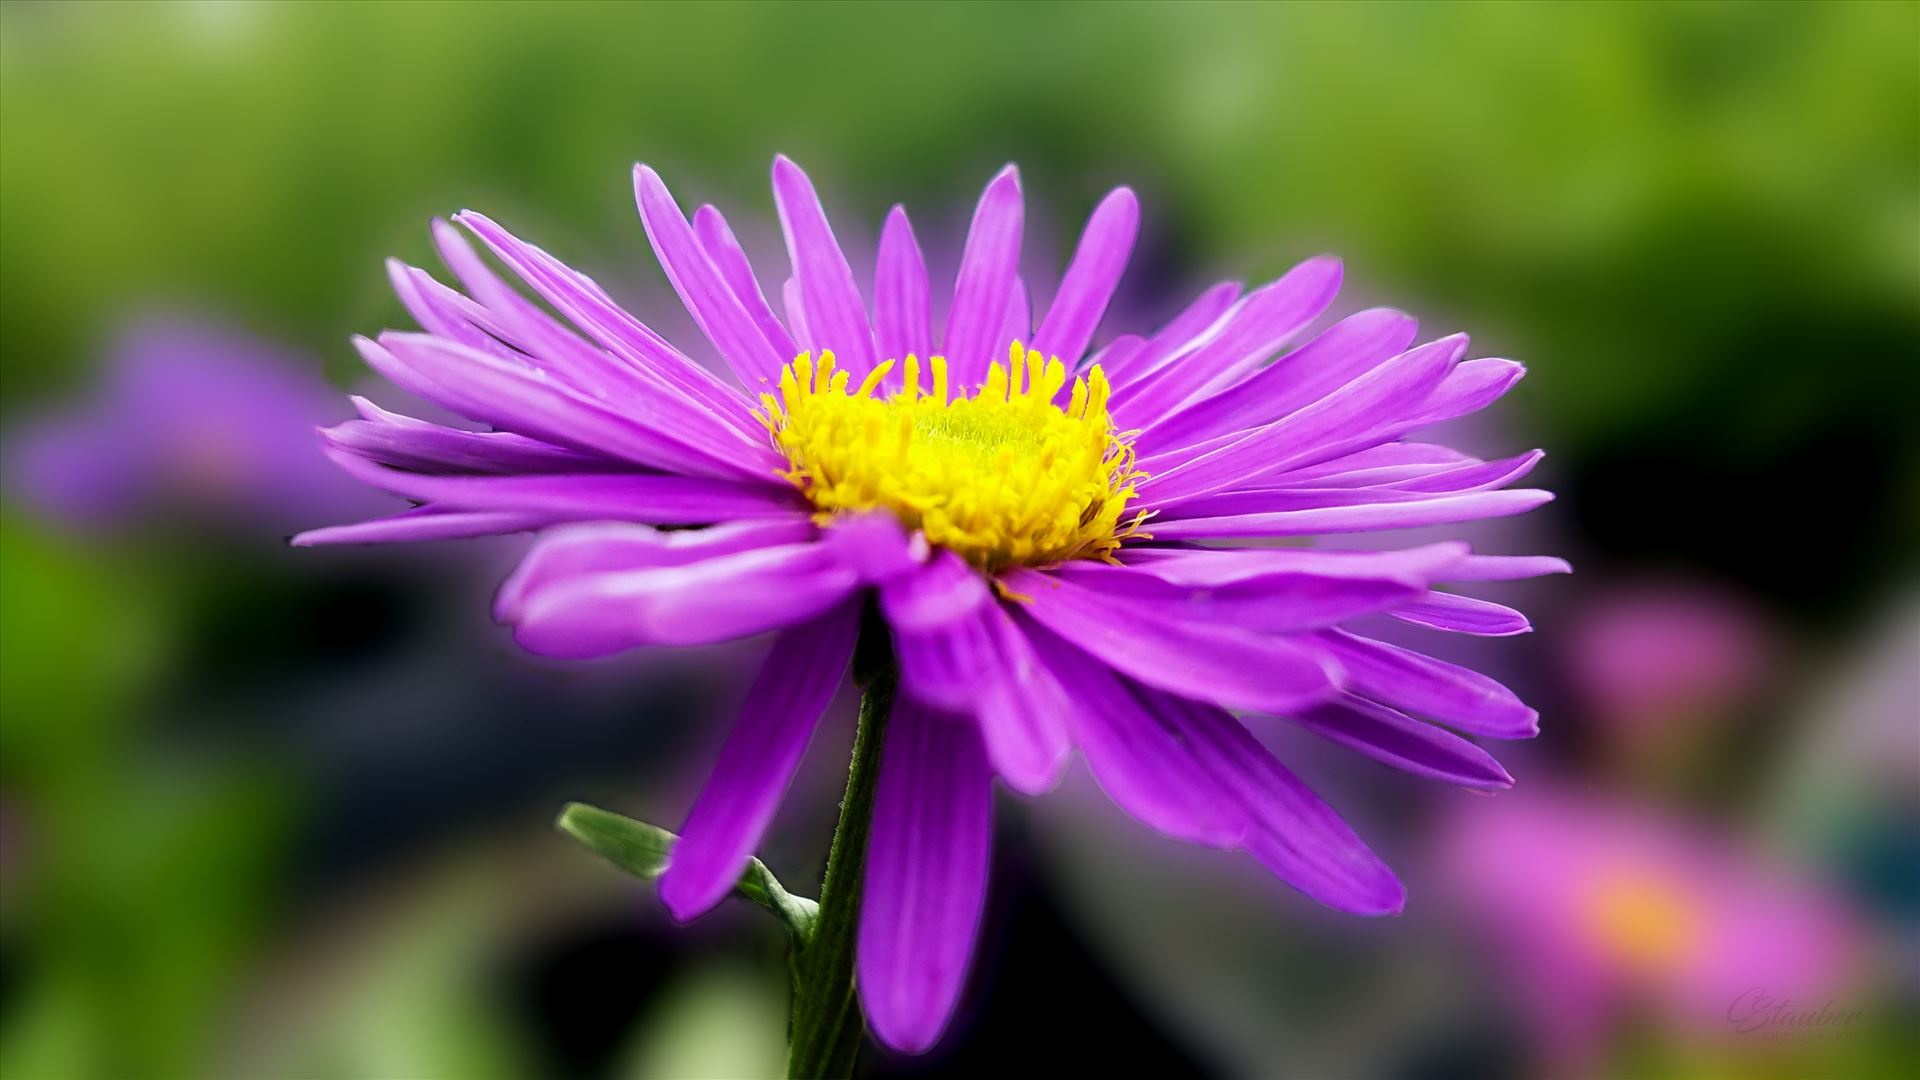 Aster20170529_143035_A.jpg  by CLStauber Photography